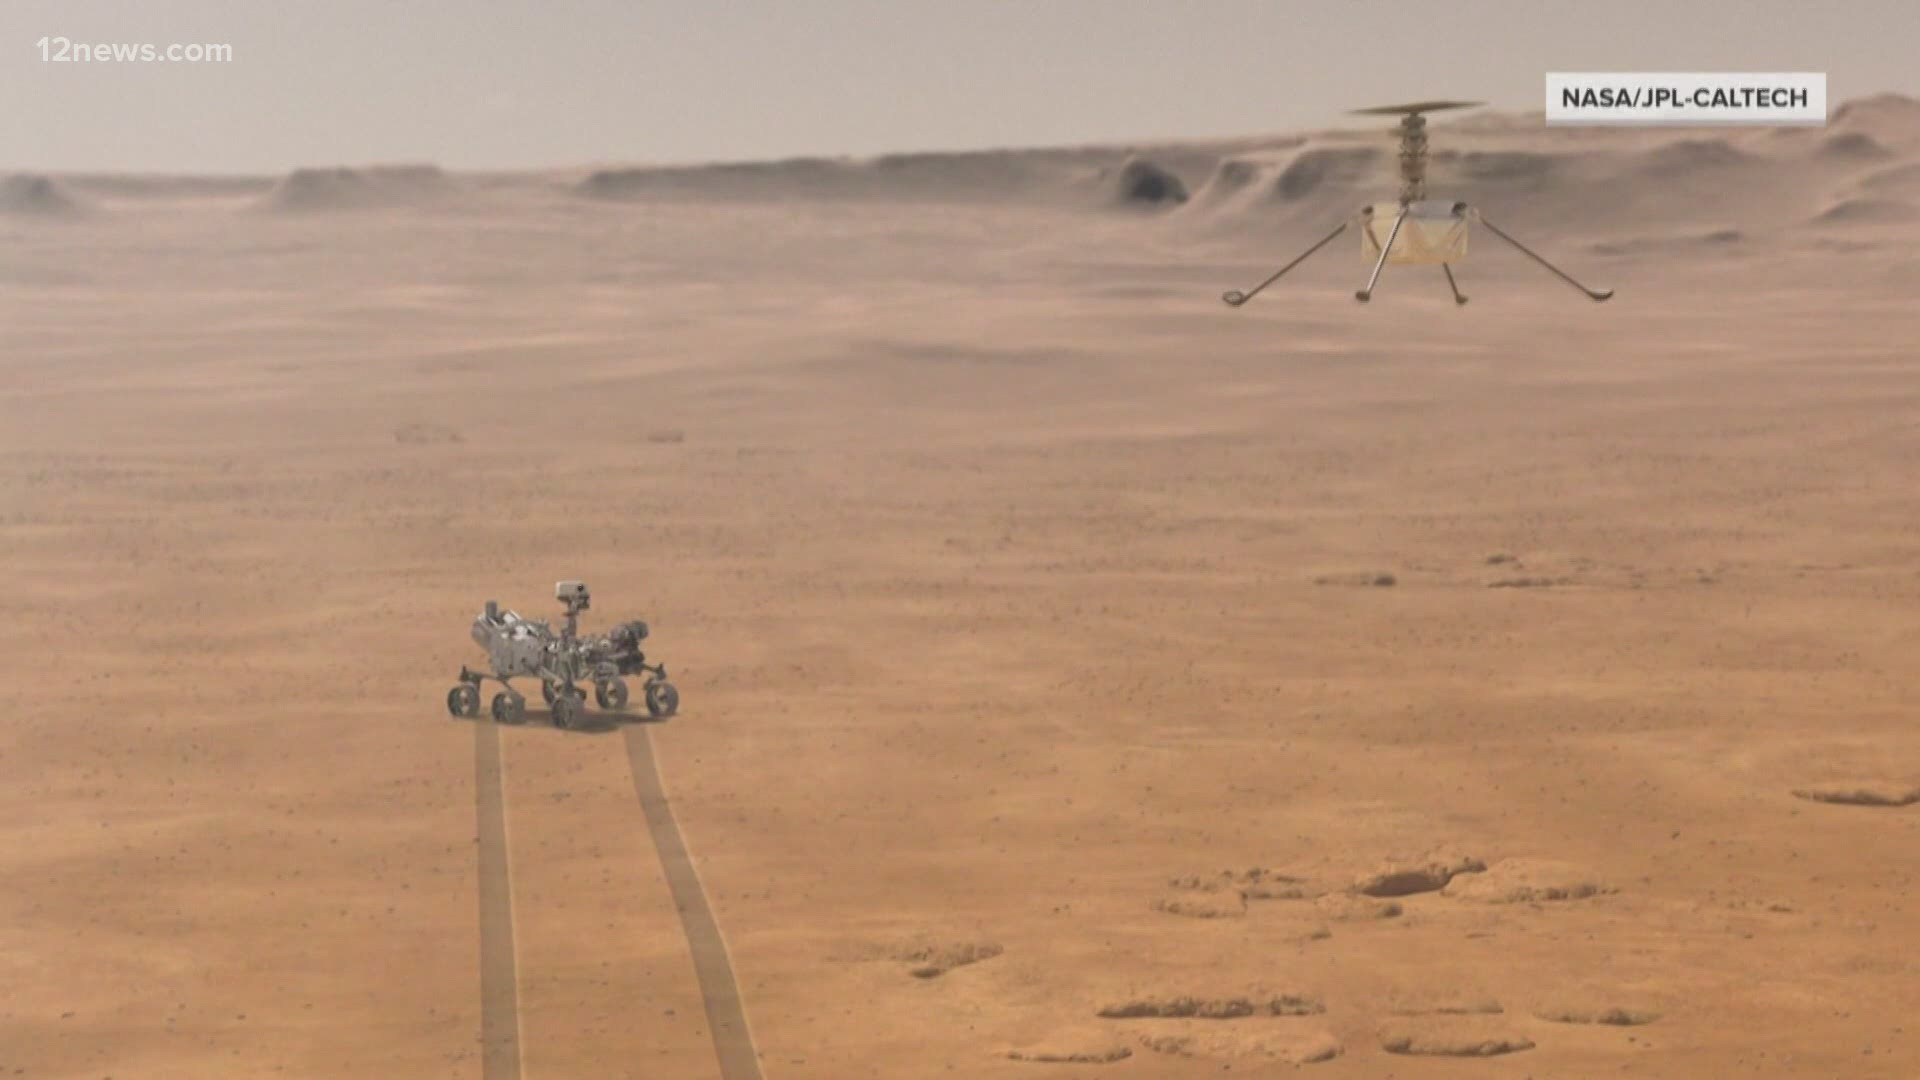 The helicopter traveled to Mars attached to the bottom of the Perseverance rover, which landed on the red planet in February.